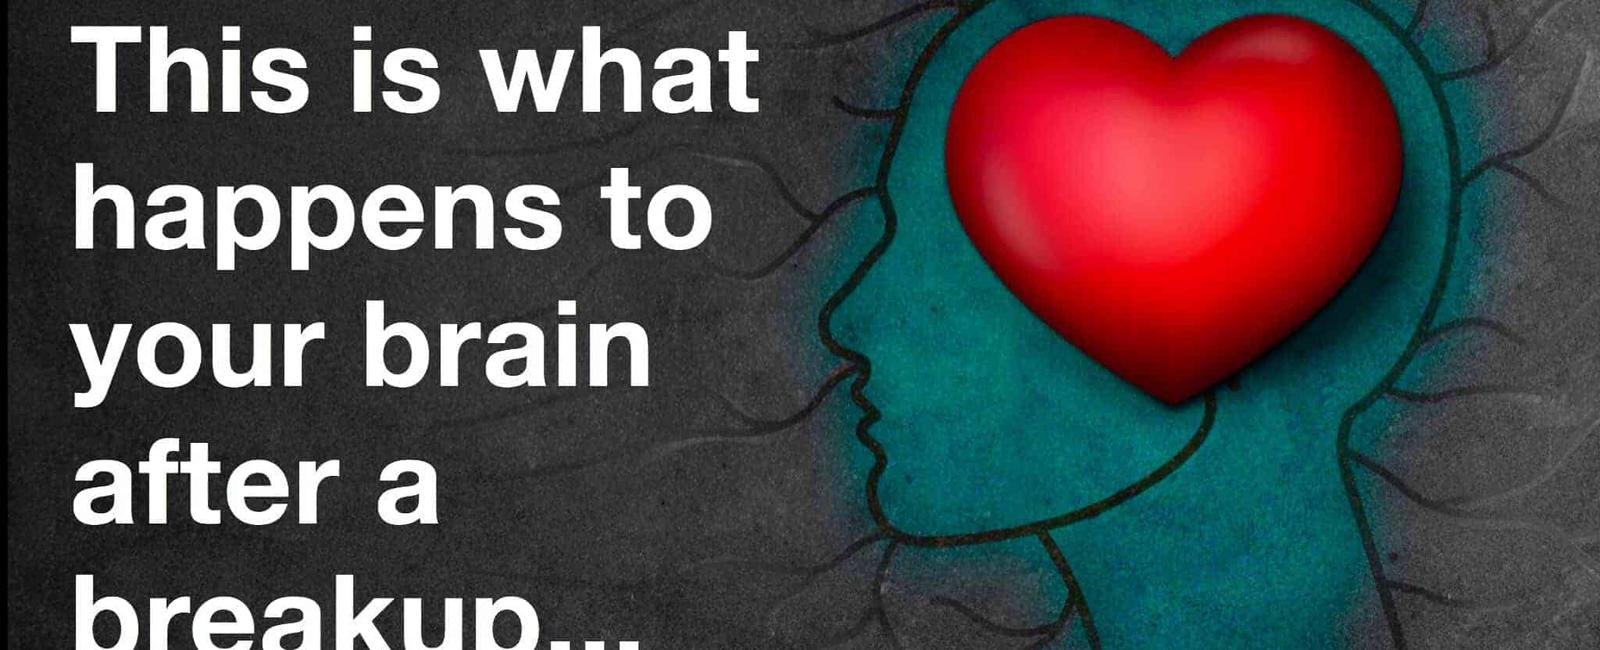 Recovering from a break up has the same impact on the brain as recovering from substance abuse